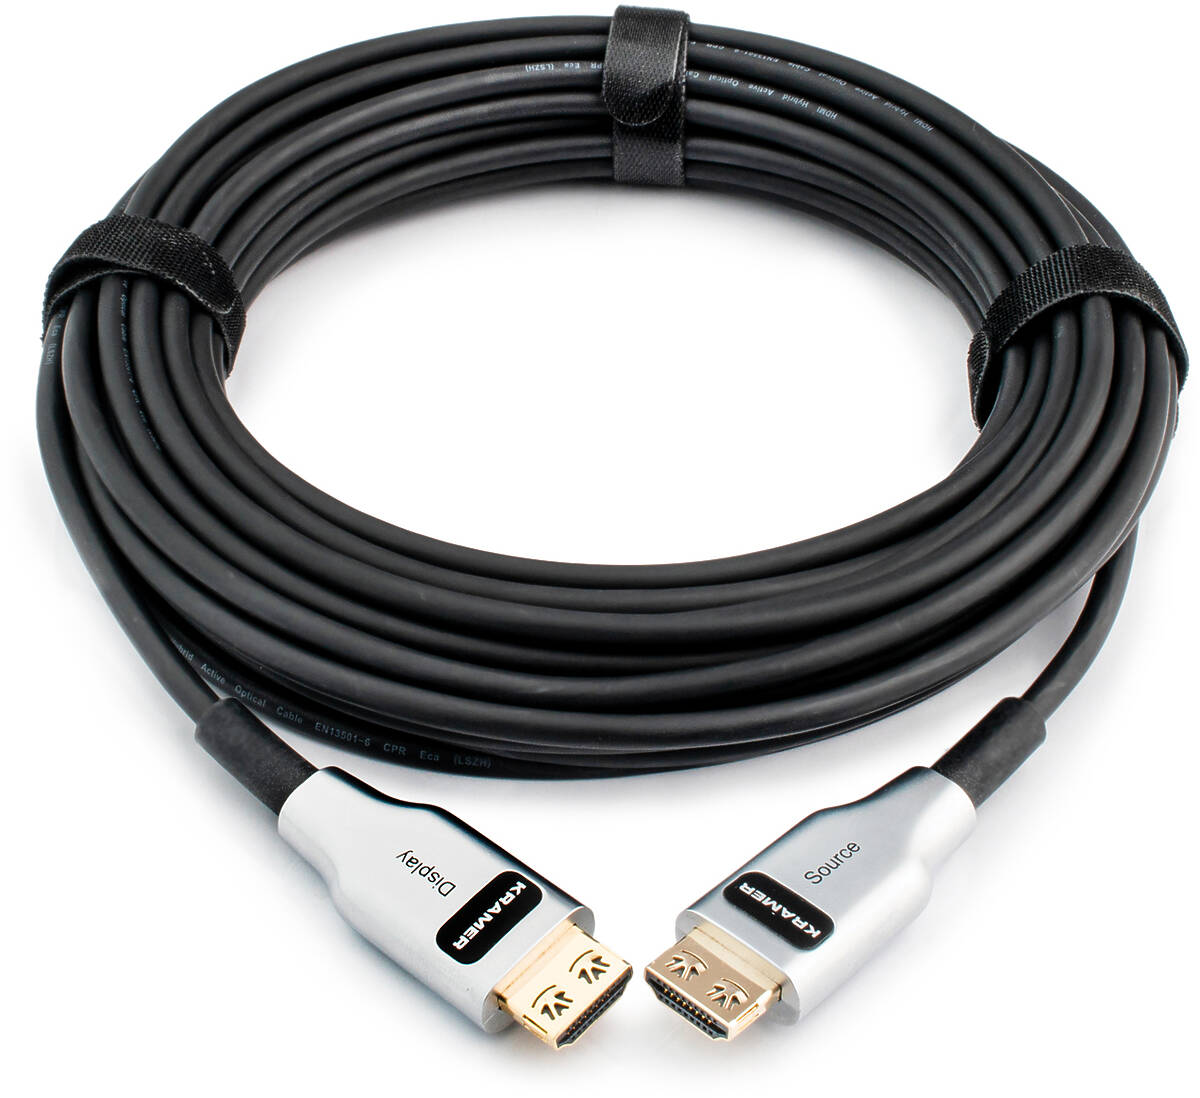 CLS-AOCH/60F-33 10.00m Kramer CLS-AOCH/60F cable product image. Click to enlarge.